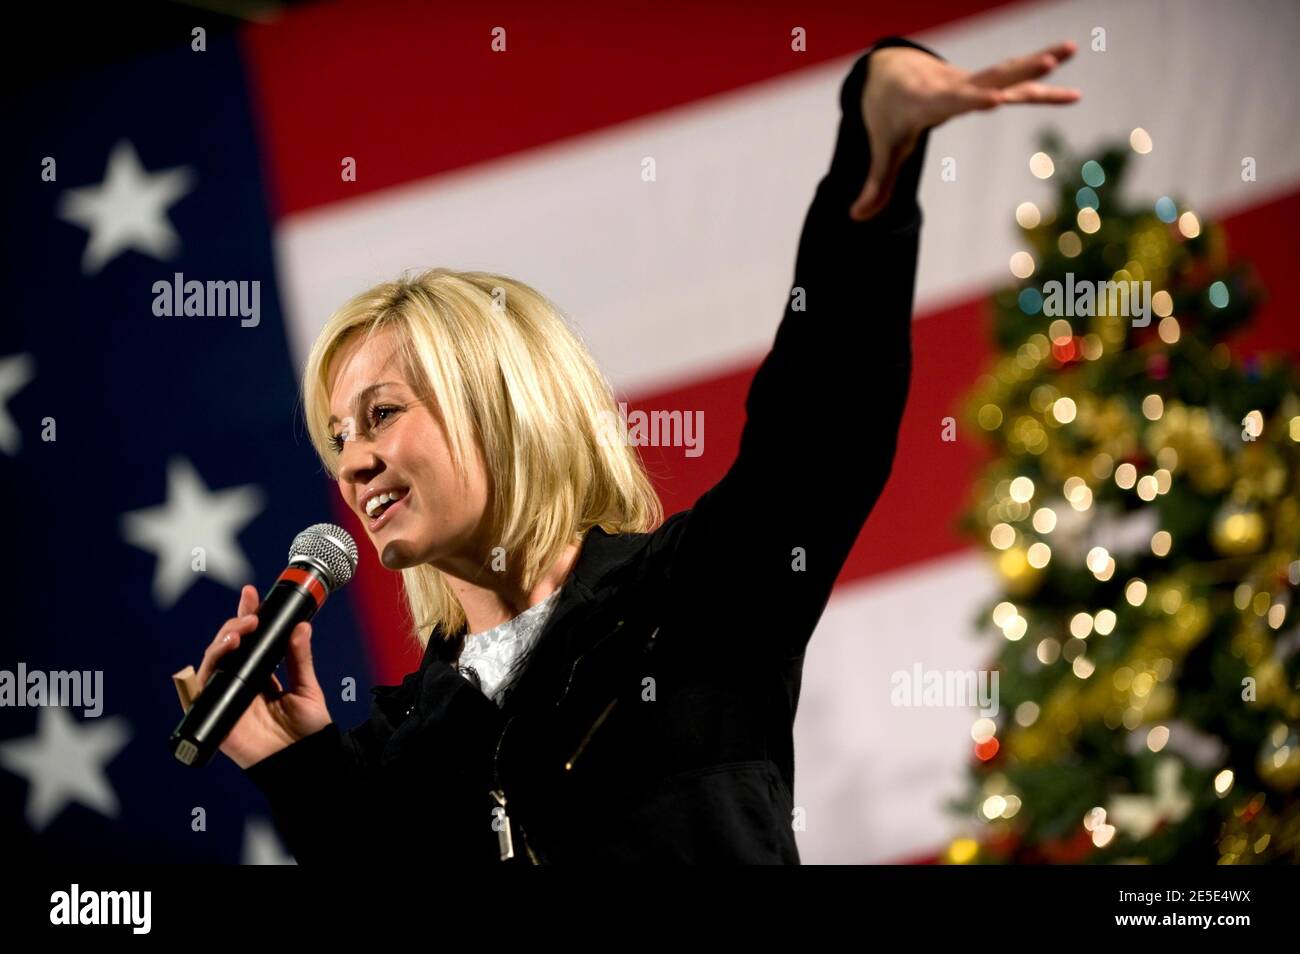 American Idol contestant Kellie Pickler entertains the troops at Bagram Air Base in Kandahar, Afghanistan on December 17, 2008, during the 2008 USO Holiday Tour. Photo by Chad J. McNeeley/DOD/ABACAPRESS.COM Stock Photo